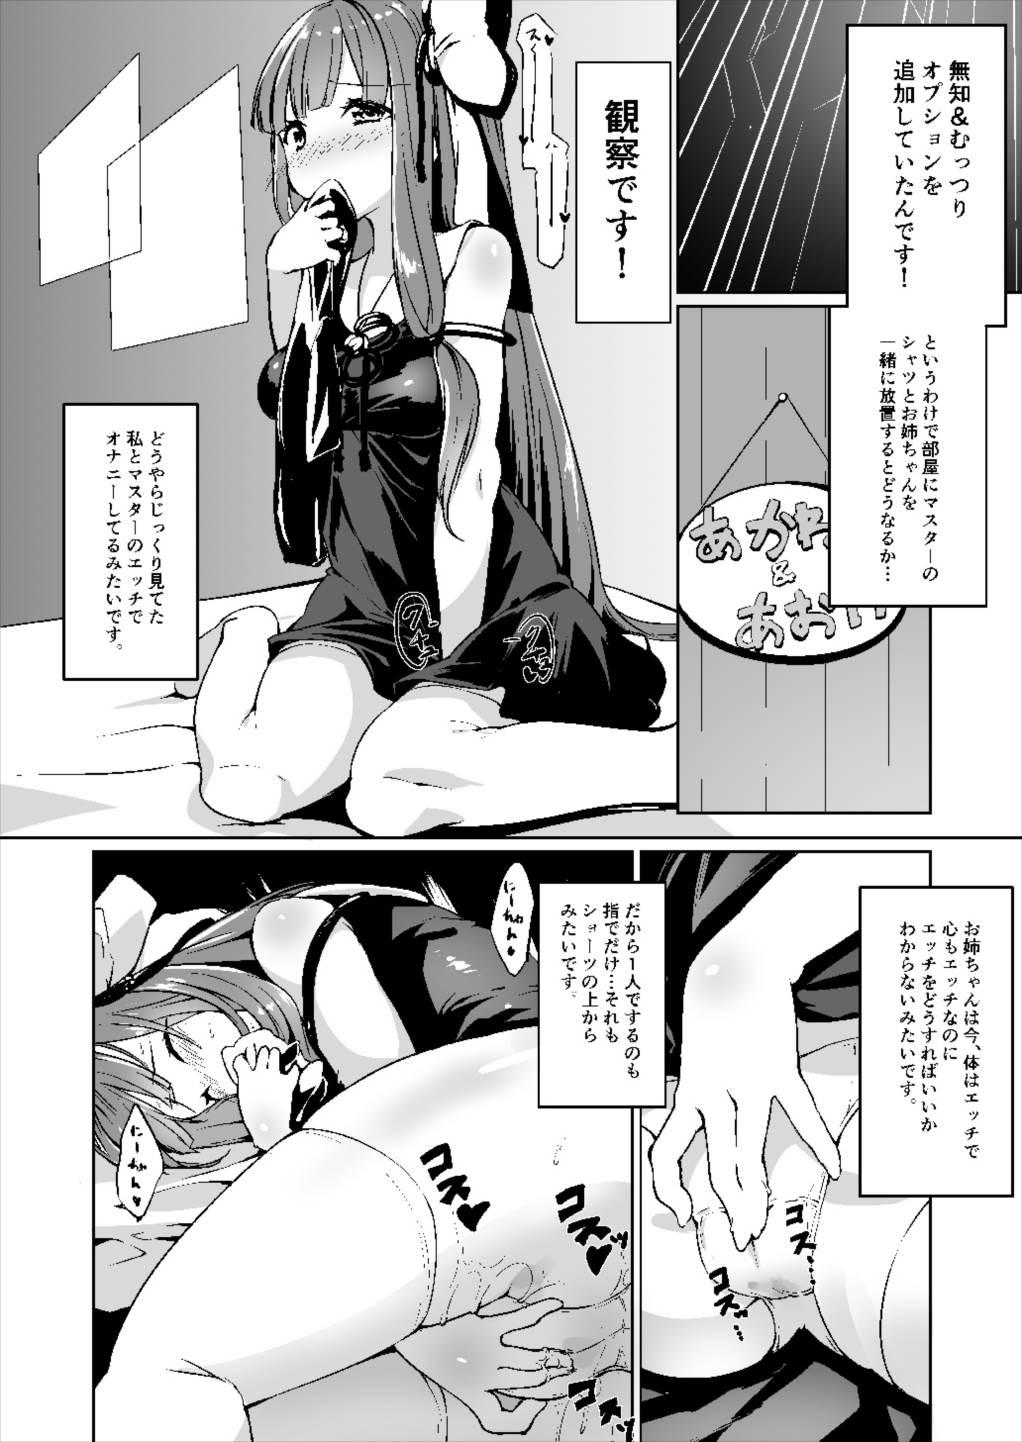 Tits コトノハラバーズ VOL.06 【お姉ちゃん観察日記】 - Vocaloid Voiceroid Asshole - Page 8